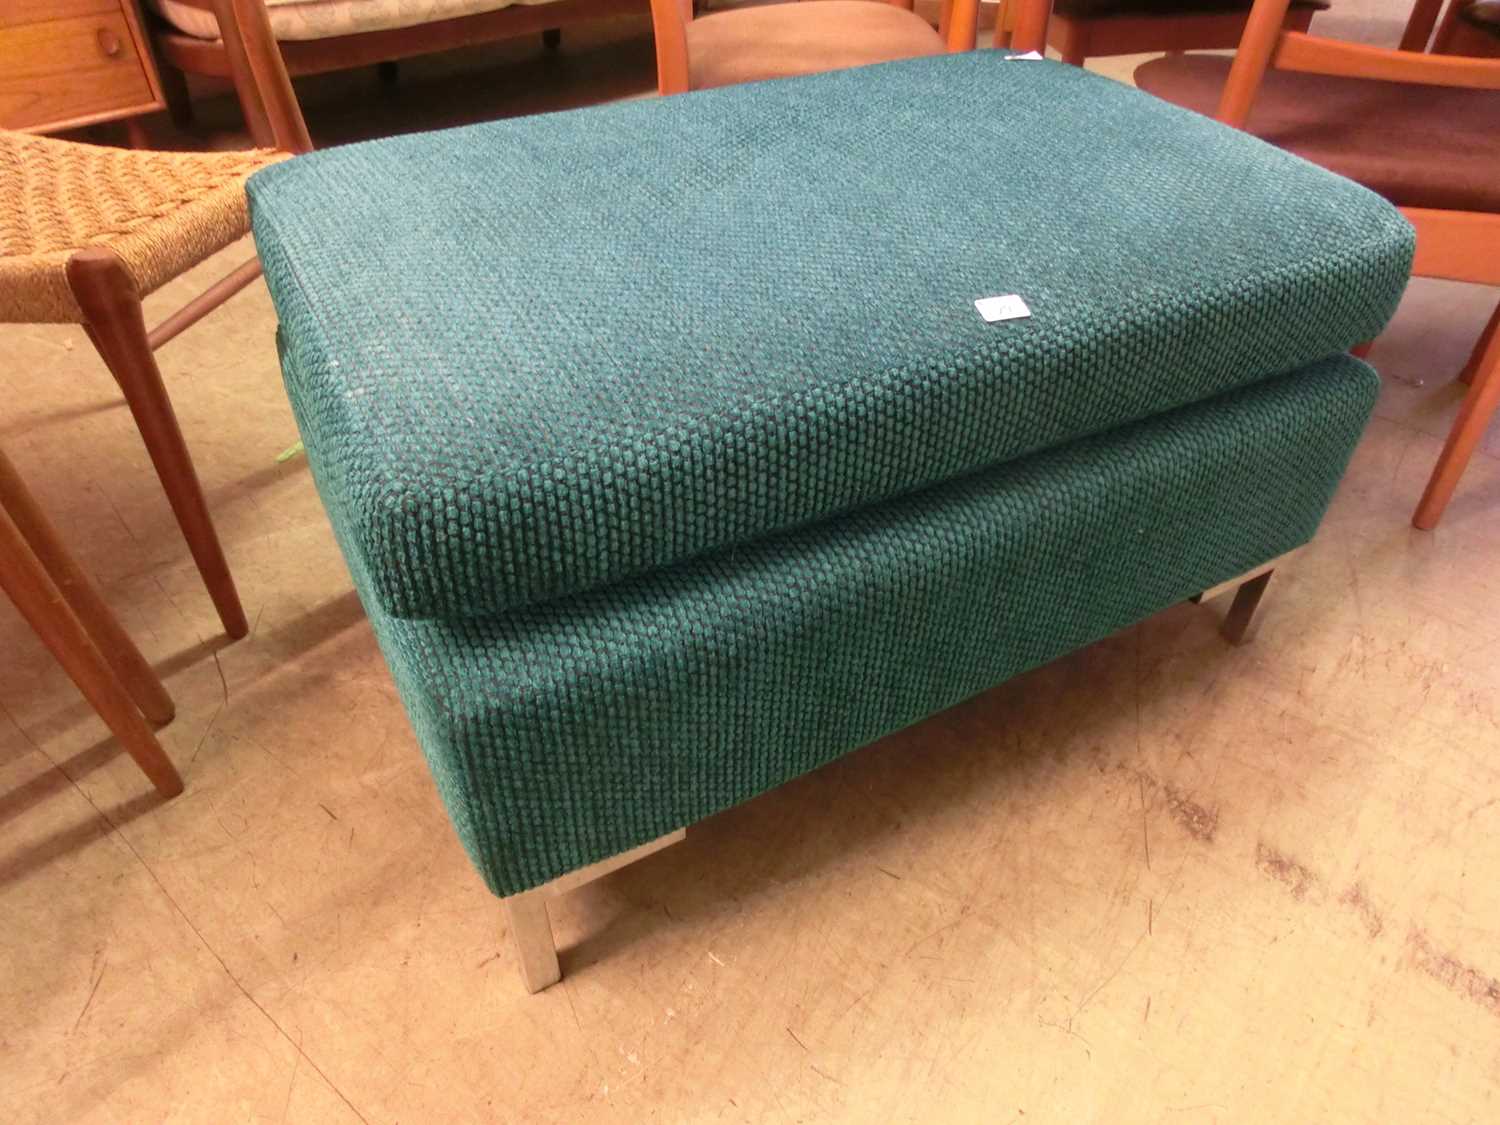 A blue fabric upholstered pouffe